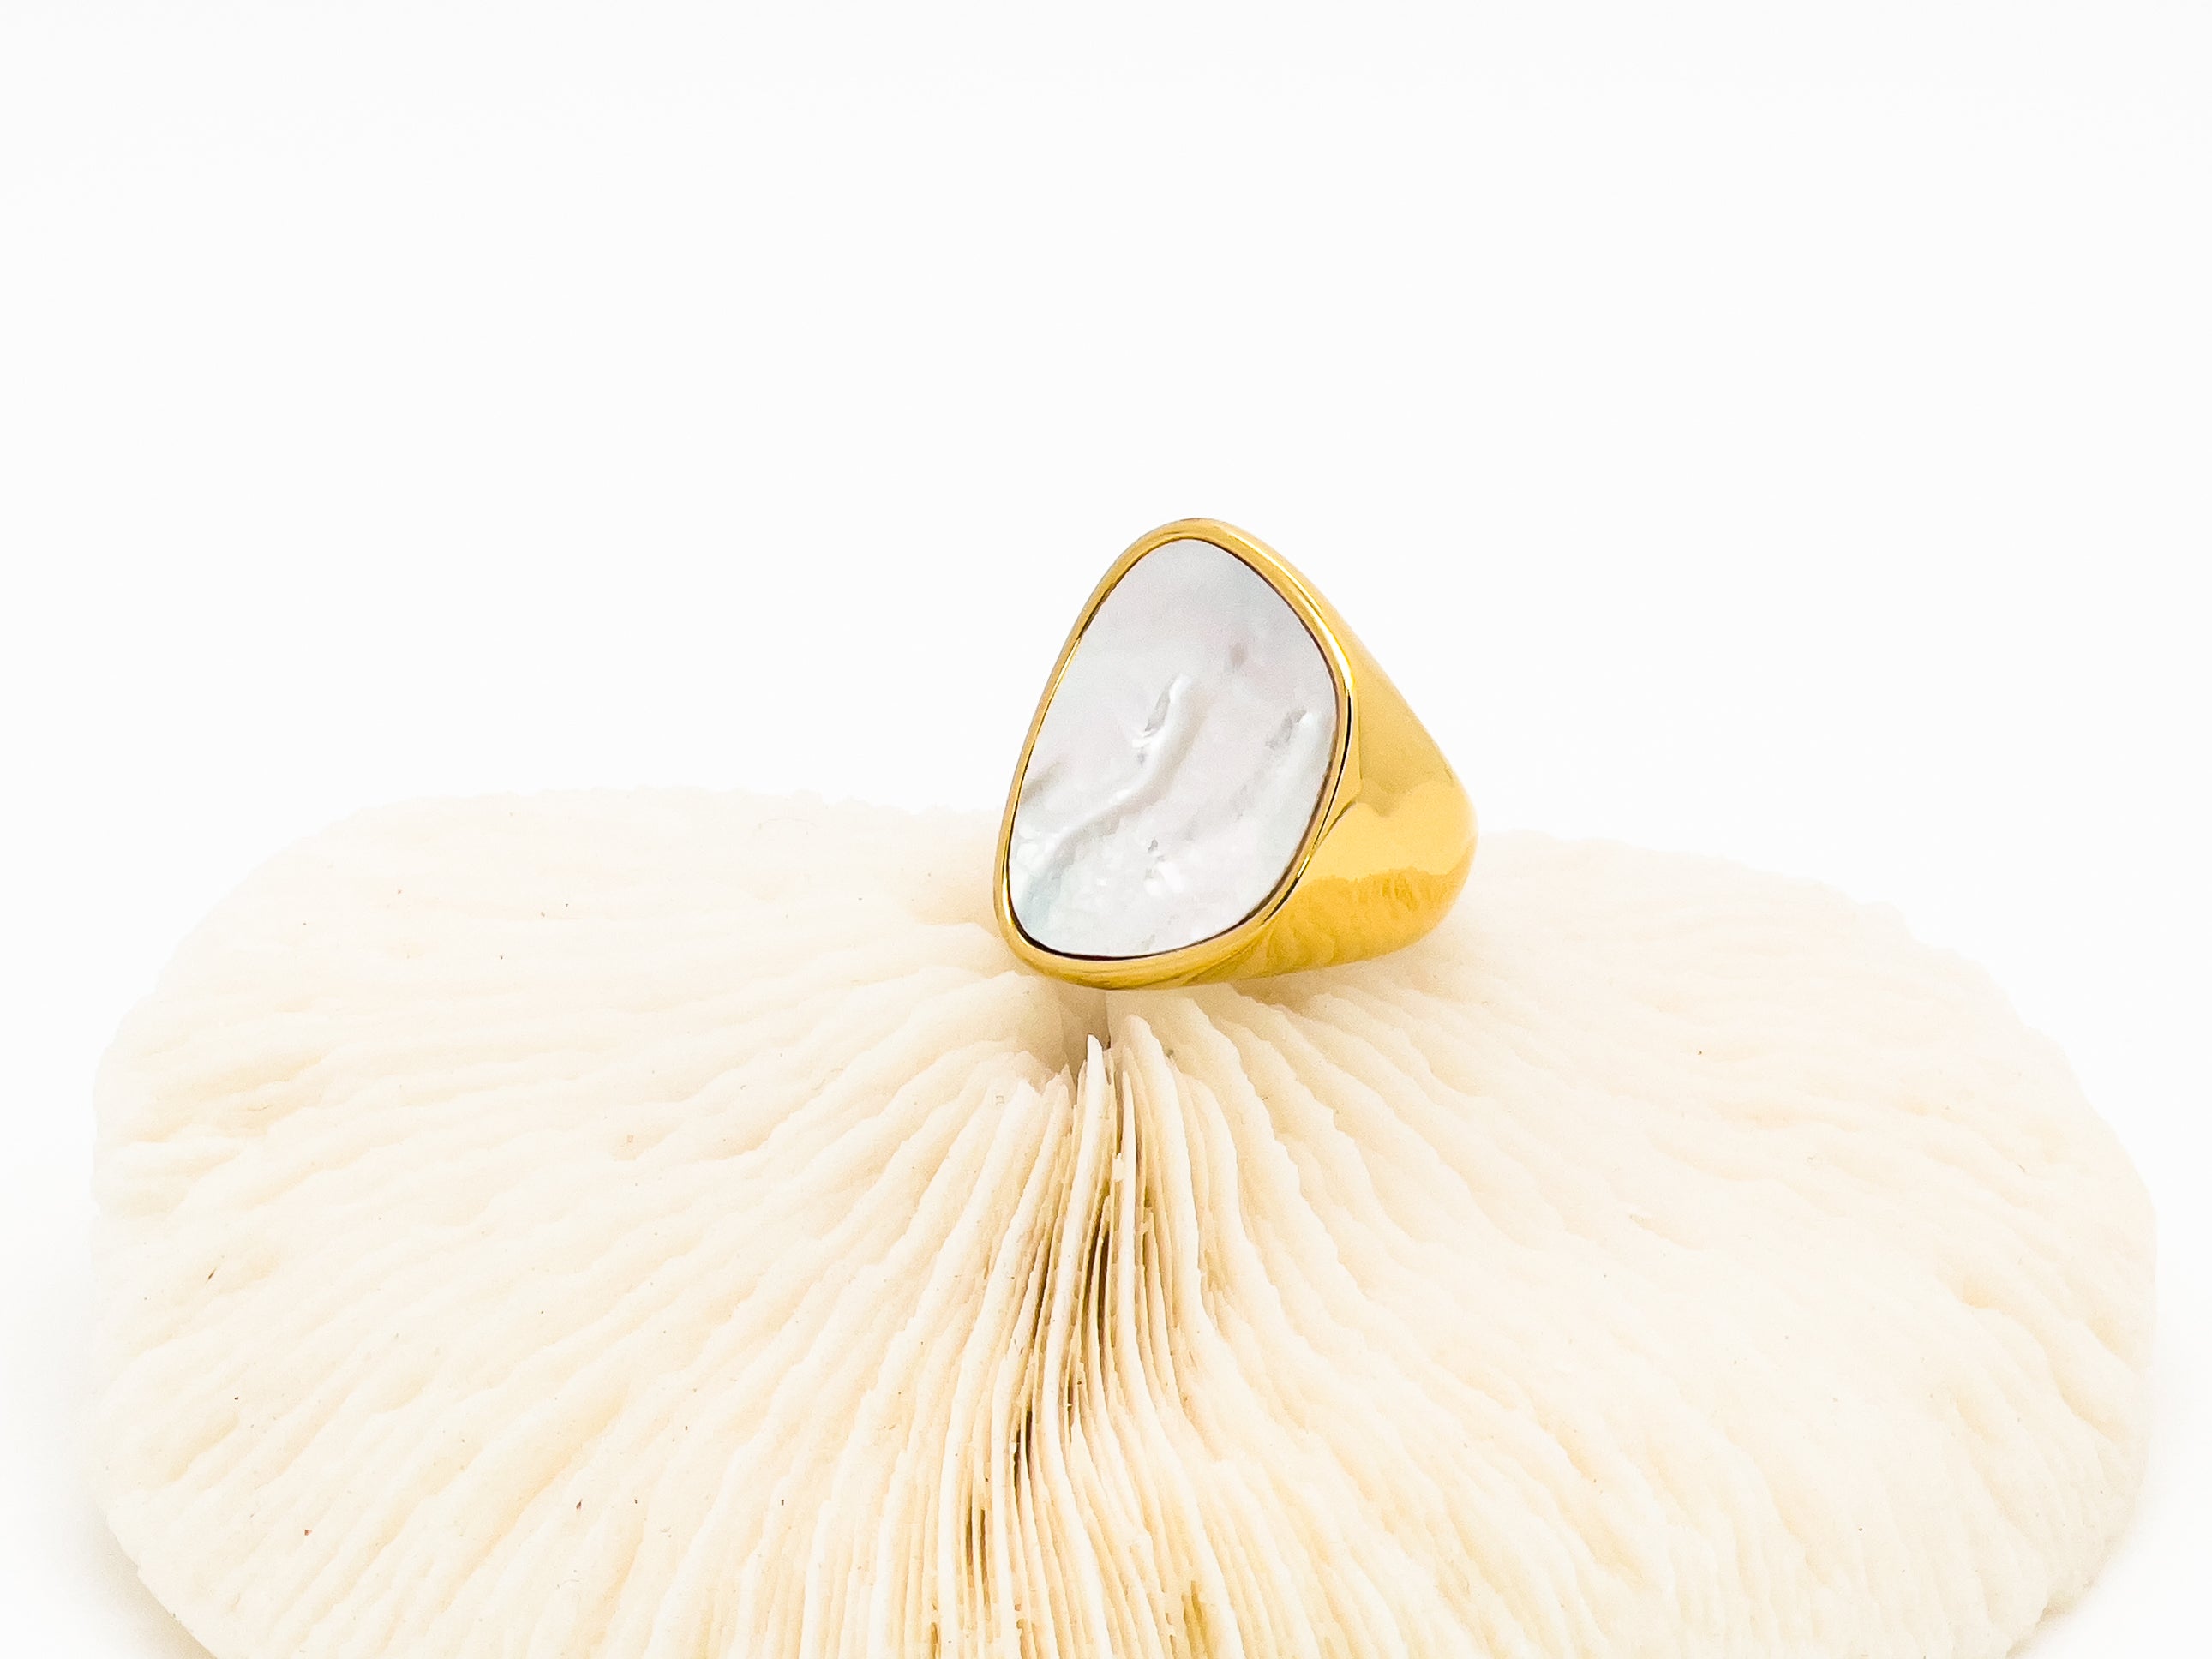 Smooth Vibes Gold Ring - Fashion Jewelry For Sale | Chic Chic BonOki Chunky Irregular Shell Gold Ring - Everyday Jewelry | Chic Chic Bon